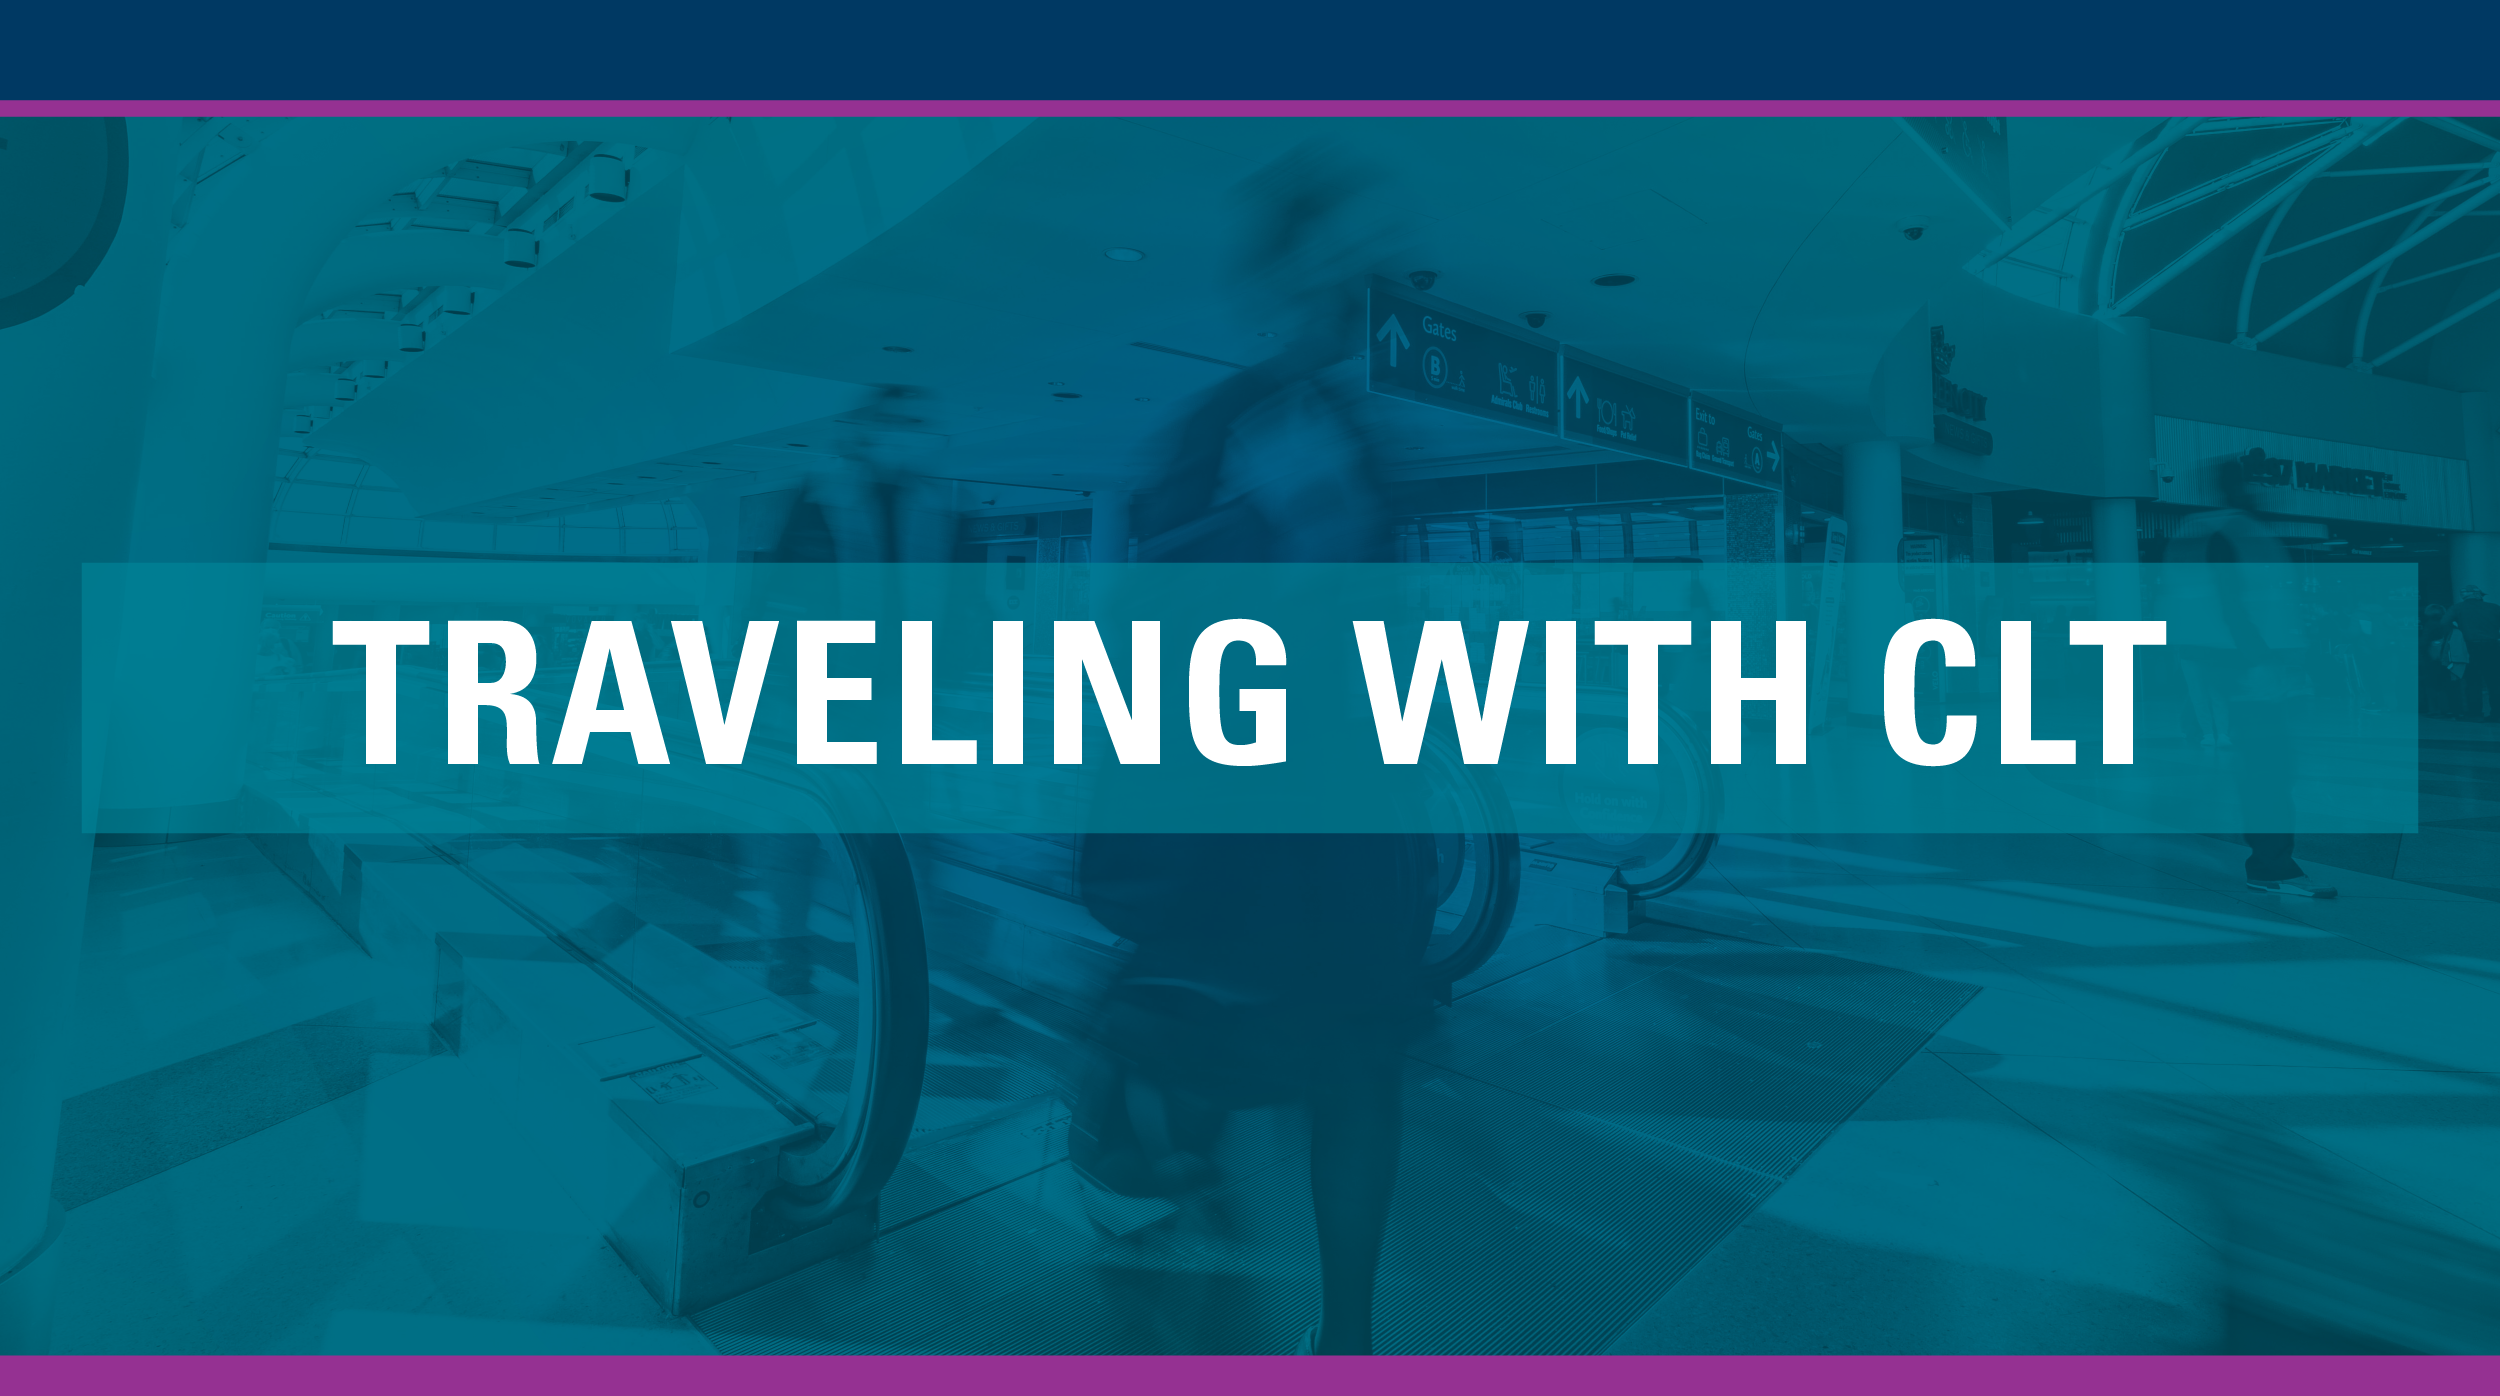 Stay Safe, Travel Safe graphic for Traveling with CLT; teal color overlay with image of passengers in terminal lobby